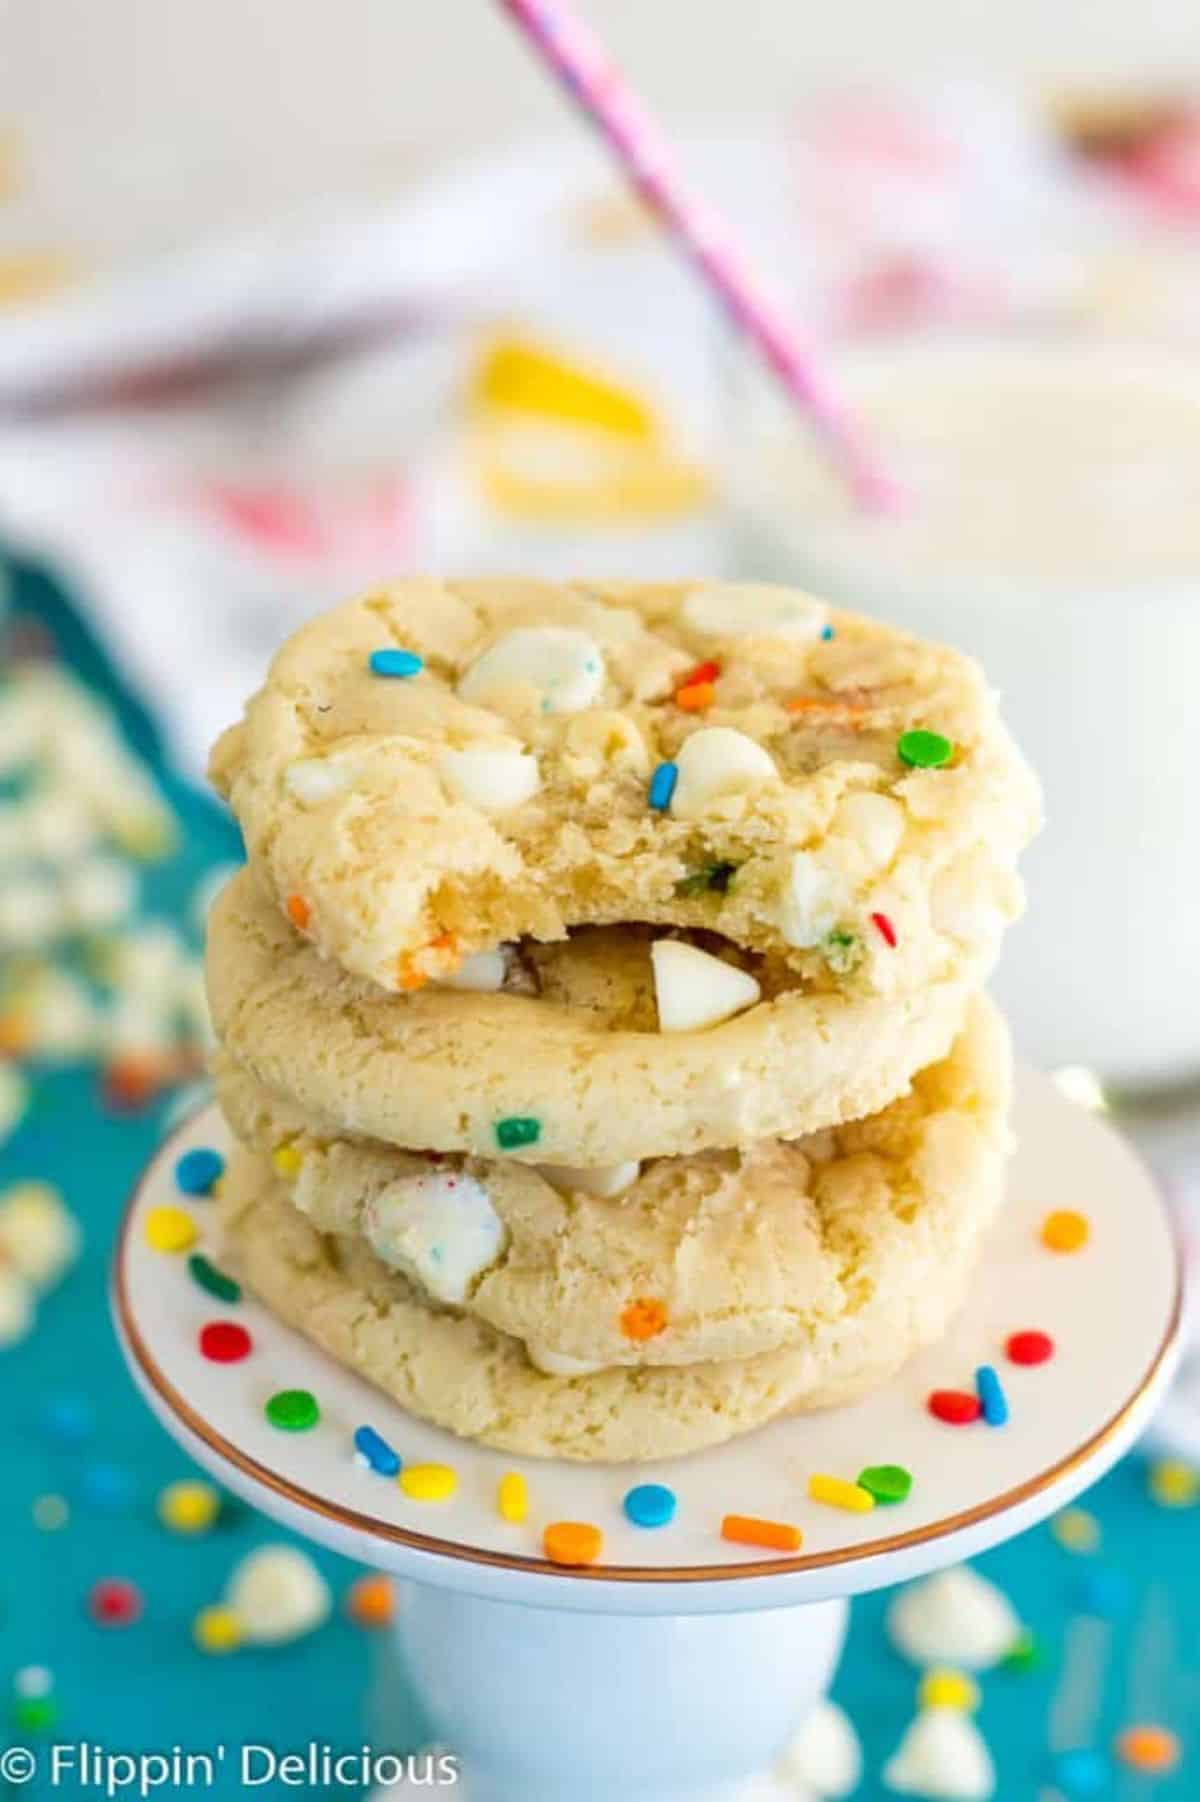 A pile of Gluten-Free Funfetti Cookies on a cake tray.